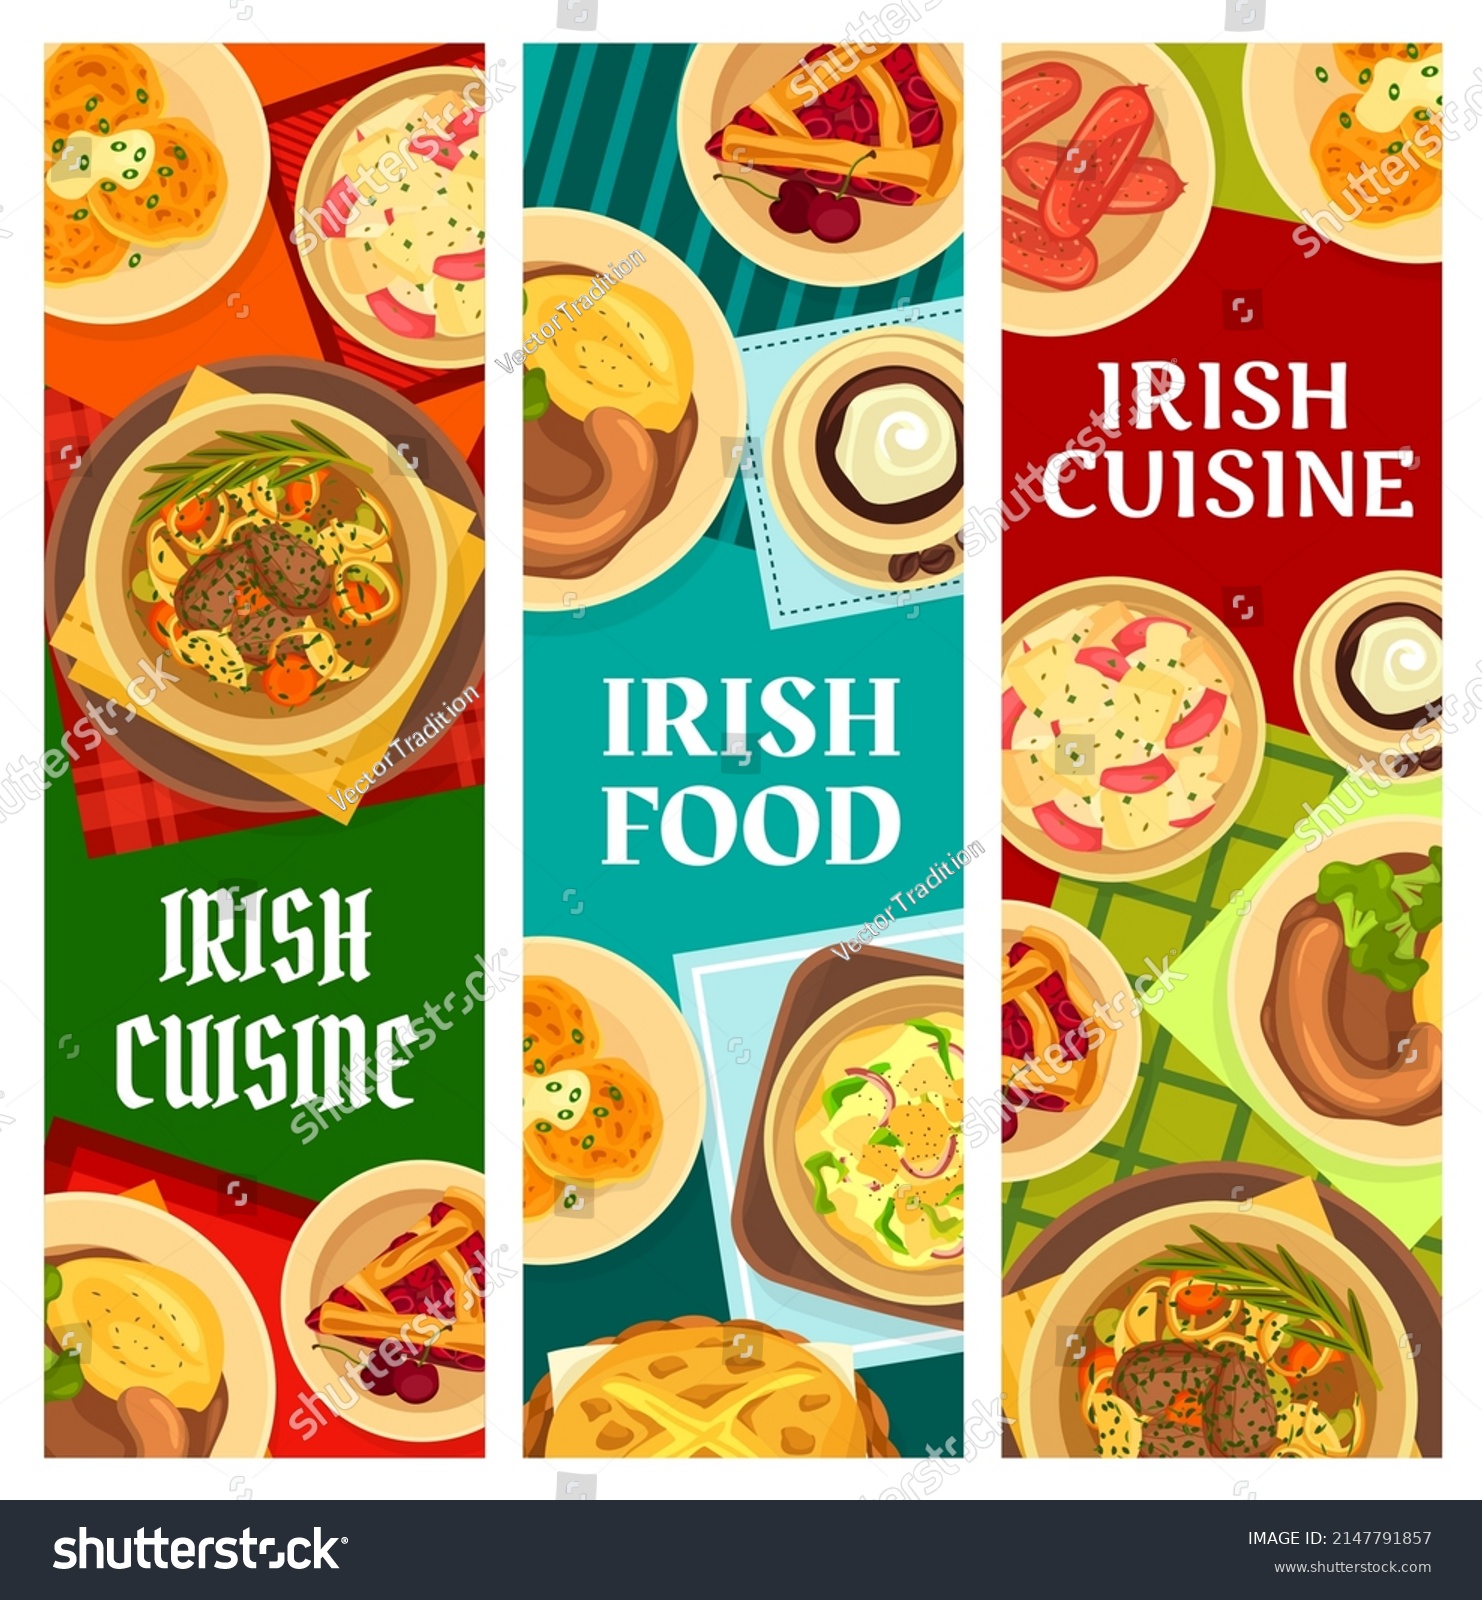 SVG of Irish cuisine restaurant meals banners. Beef vegetable Irish stew, soda bread and cherry pie, meat and beer stew, Boxty pancake, potato salad and homemade sausages vector. Irish food dishes posters svg